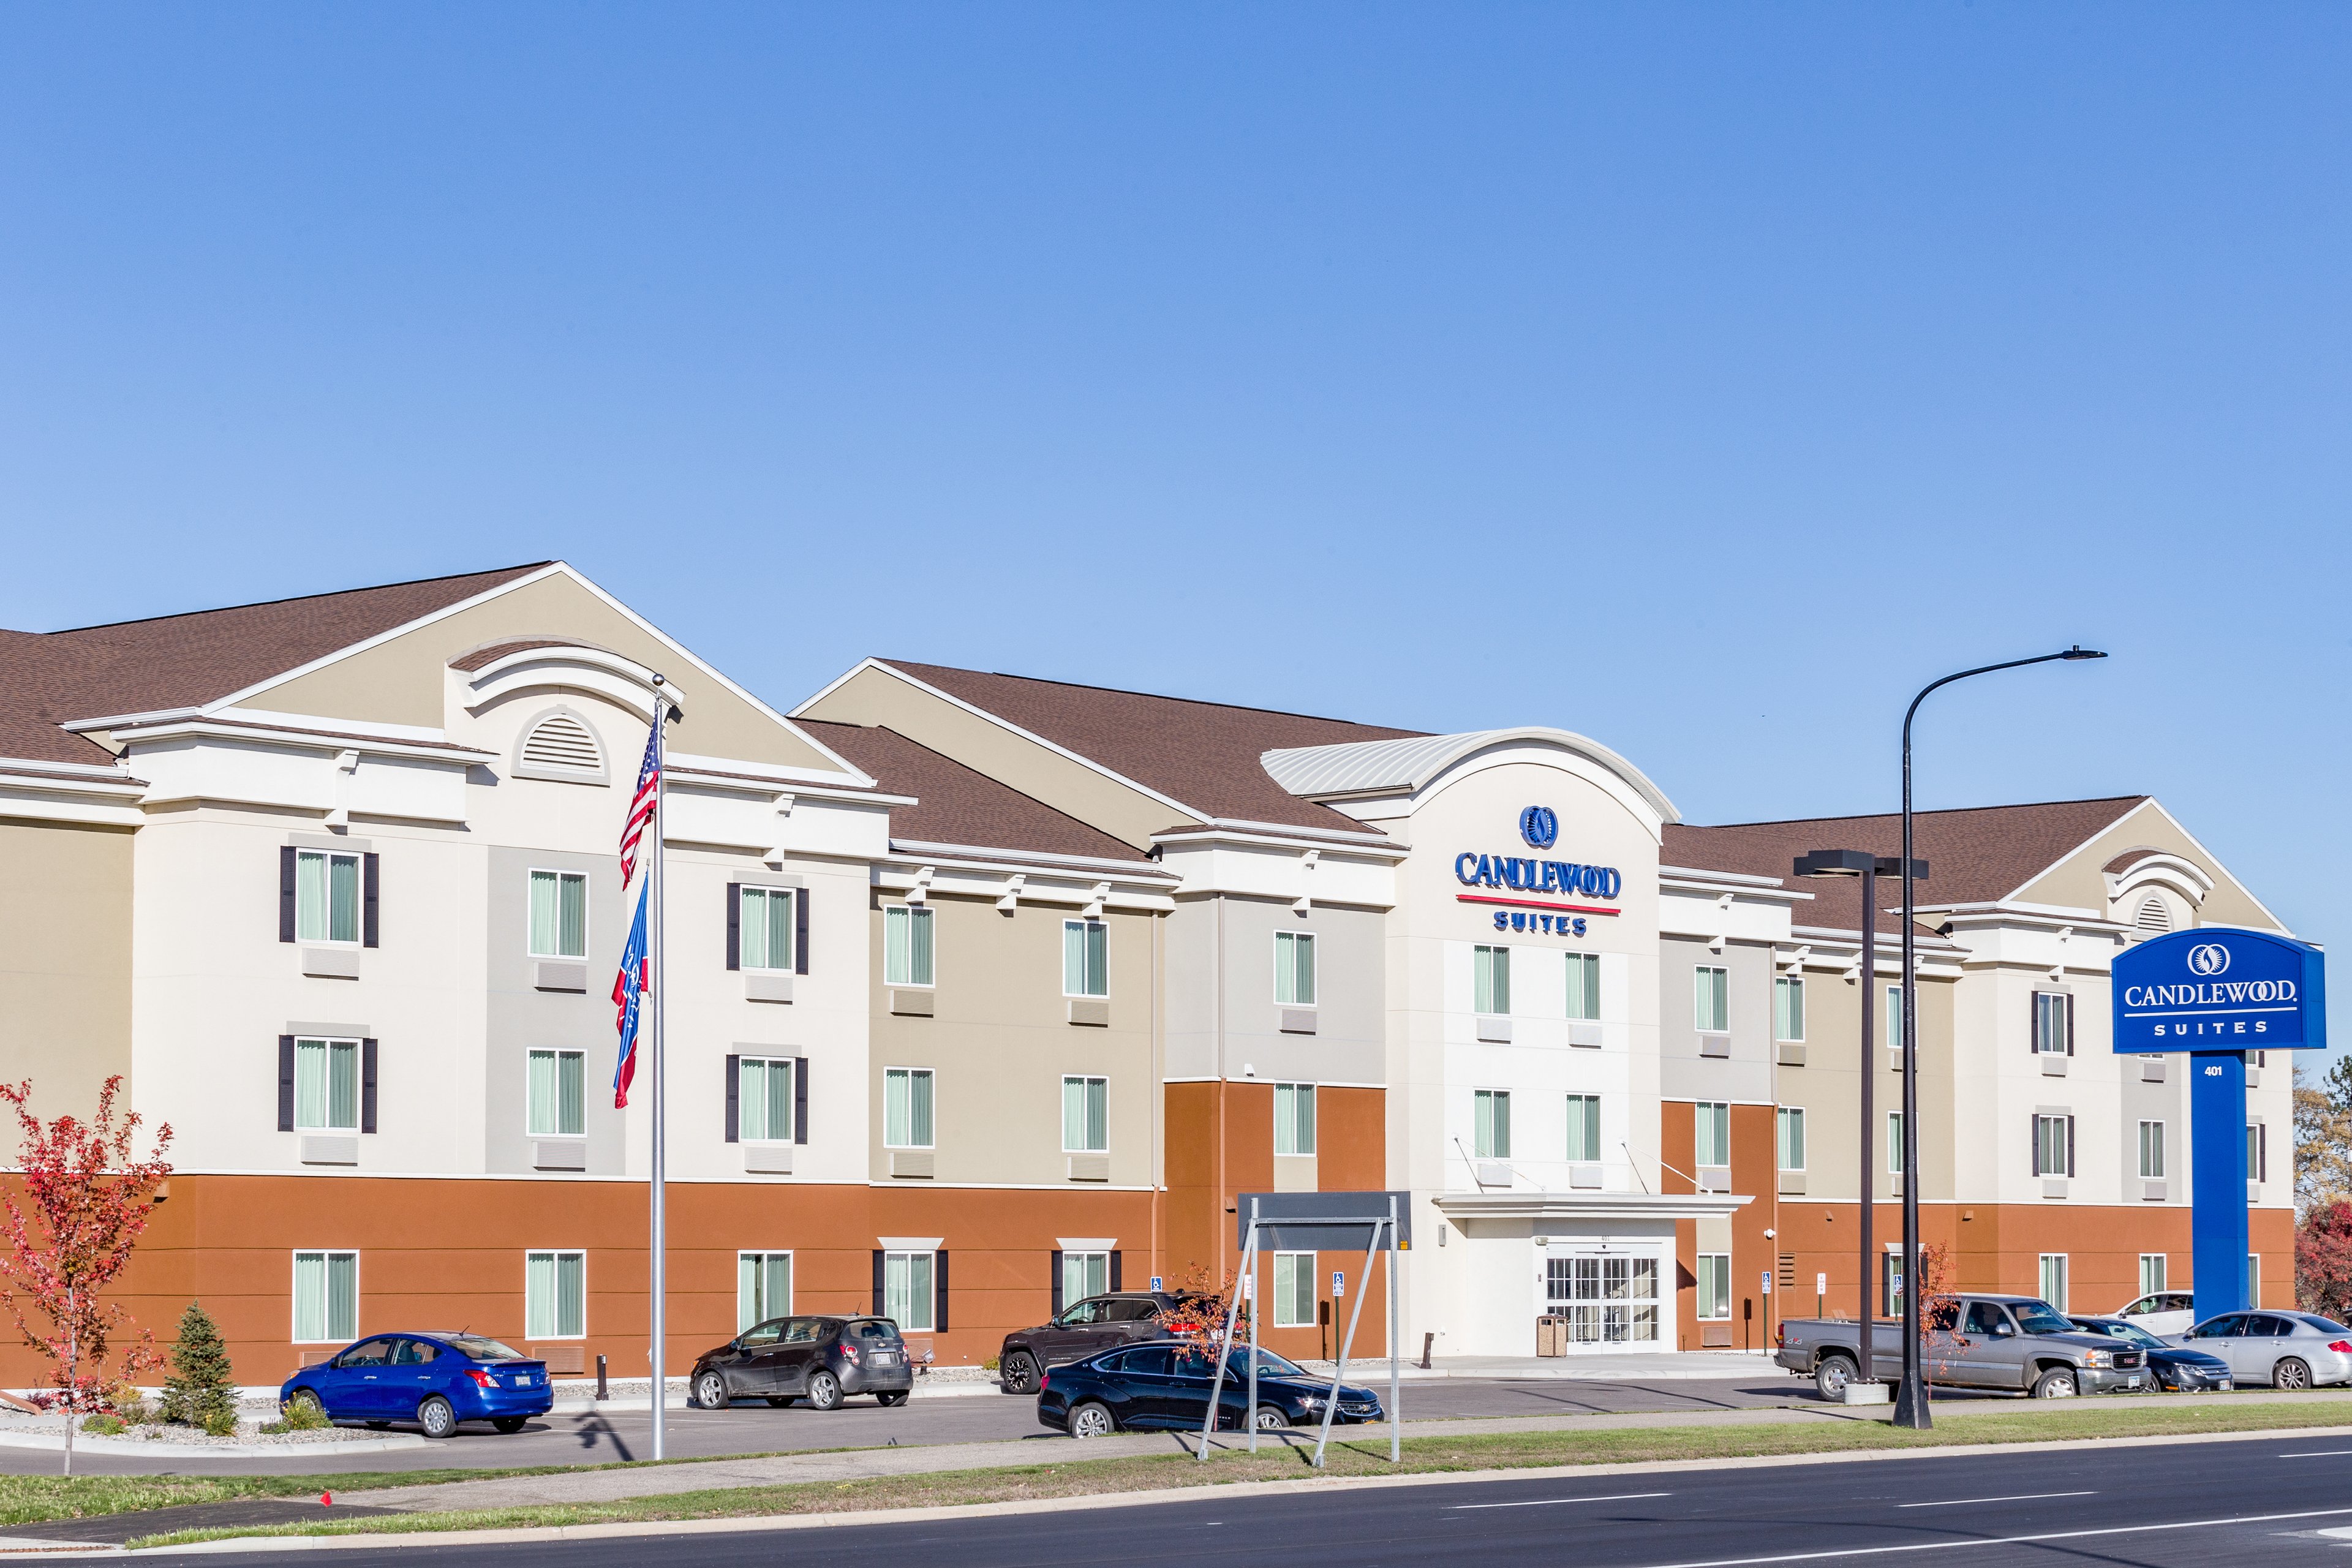 Welcome to the Candlewood Suites of Bemidji!